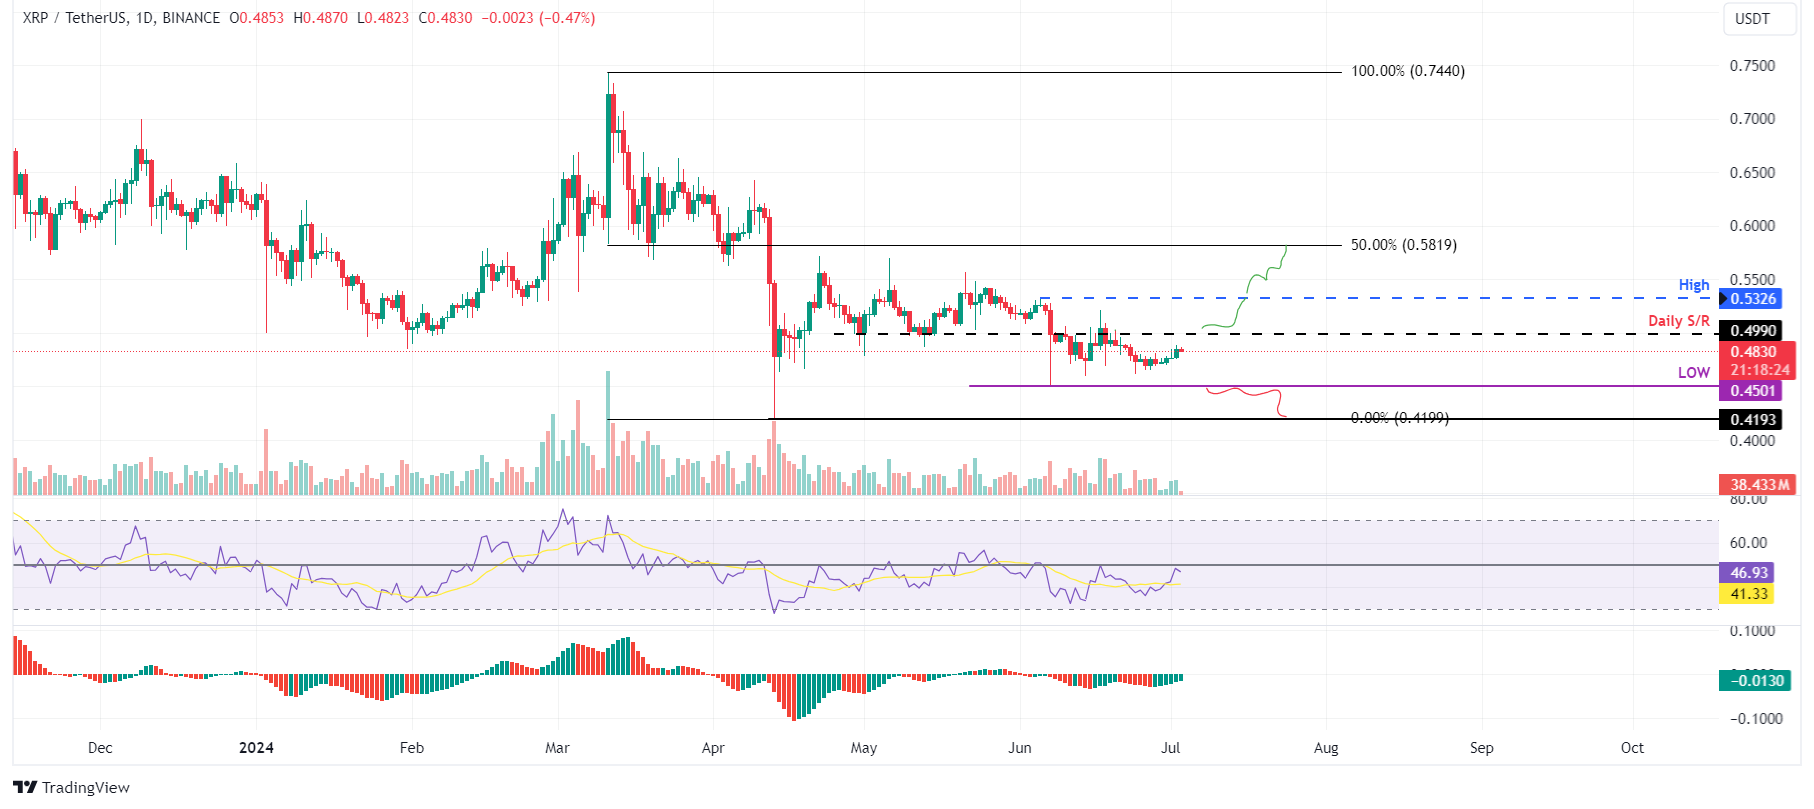 XRP/USDT daily chart